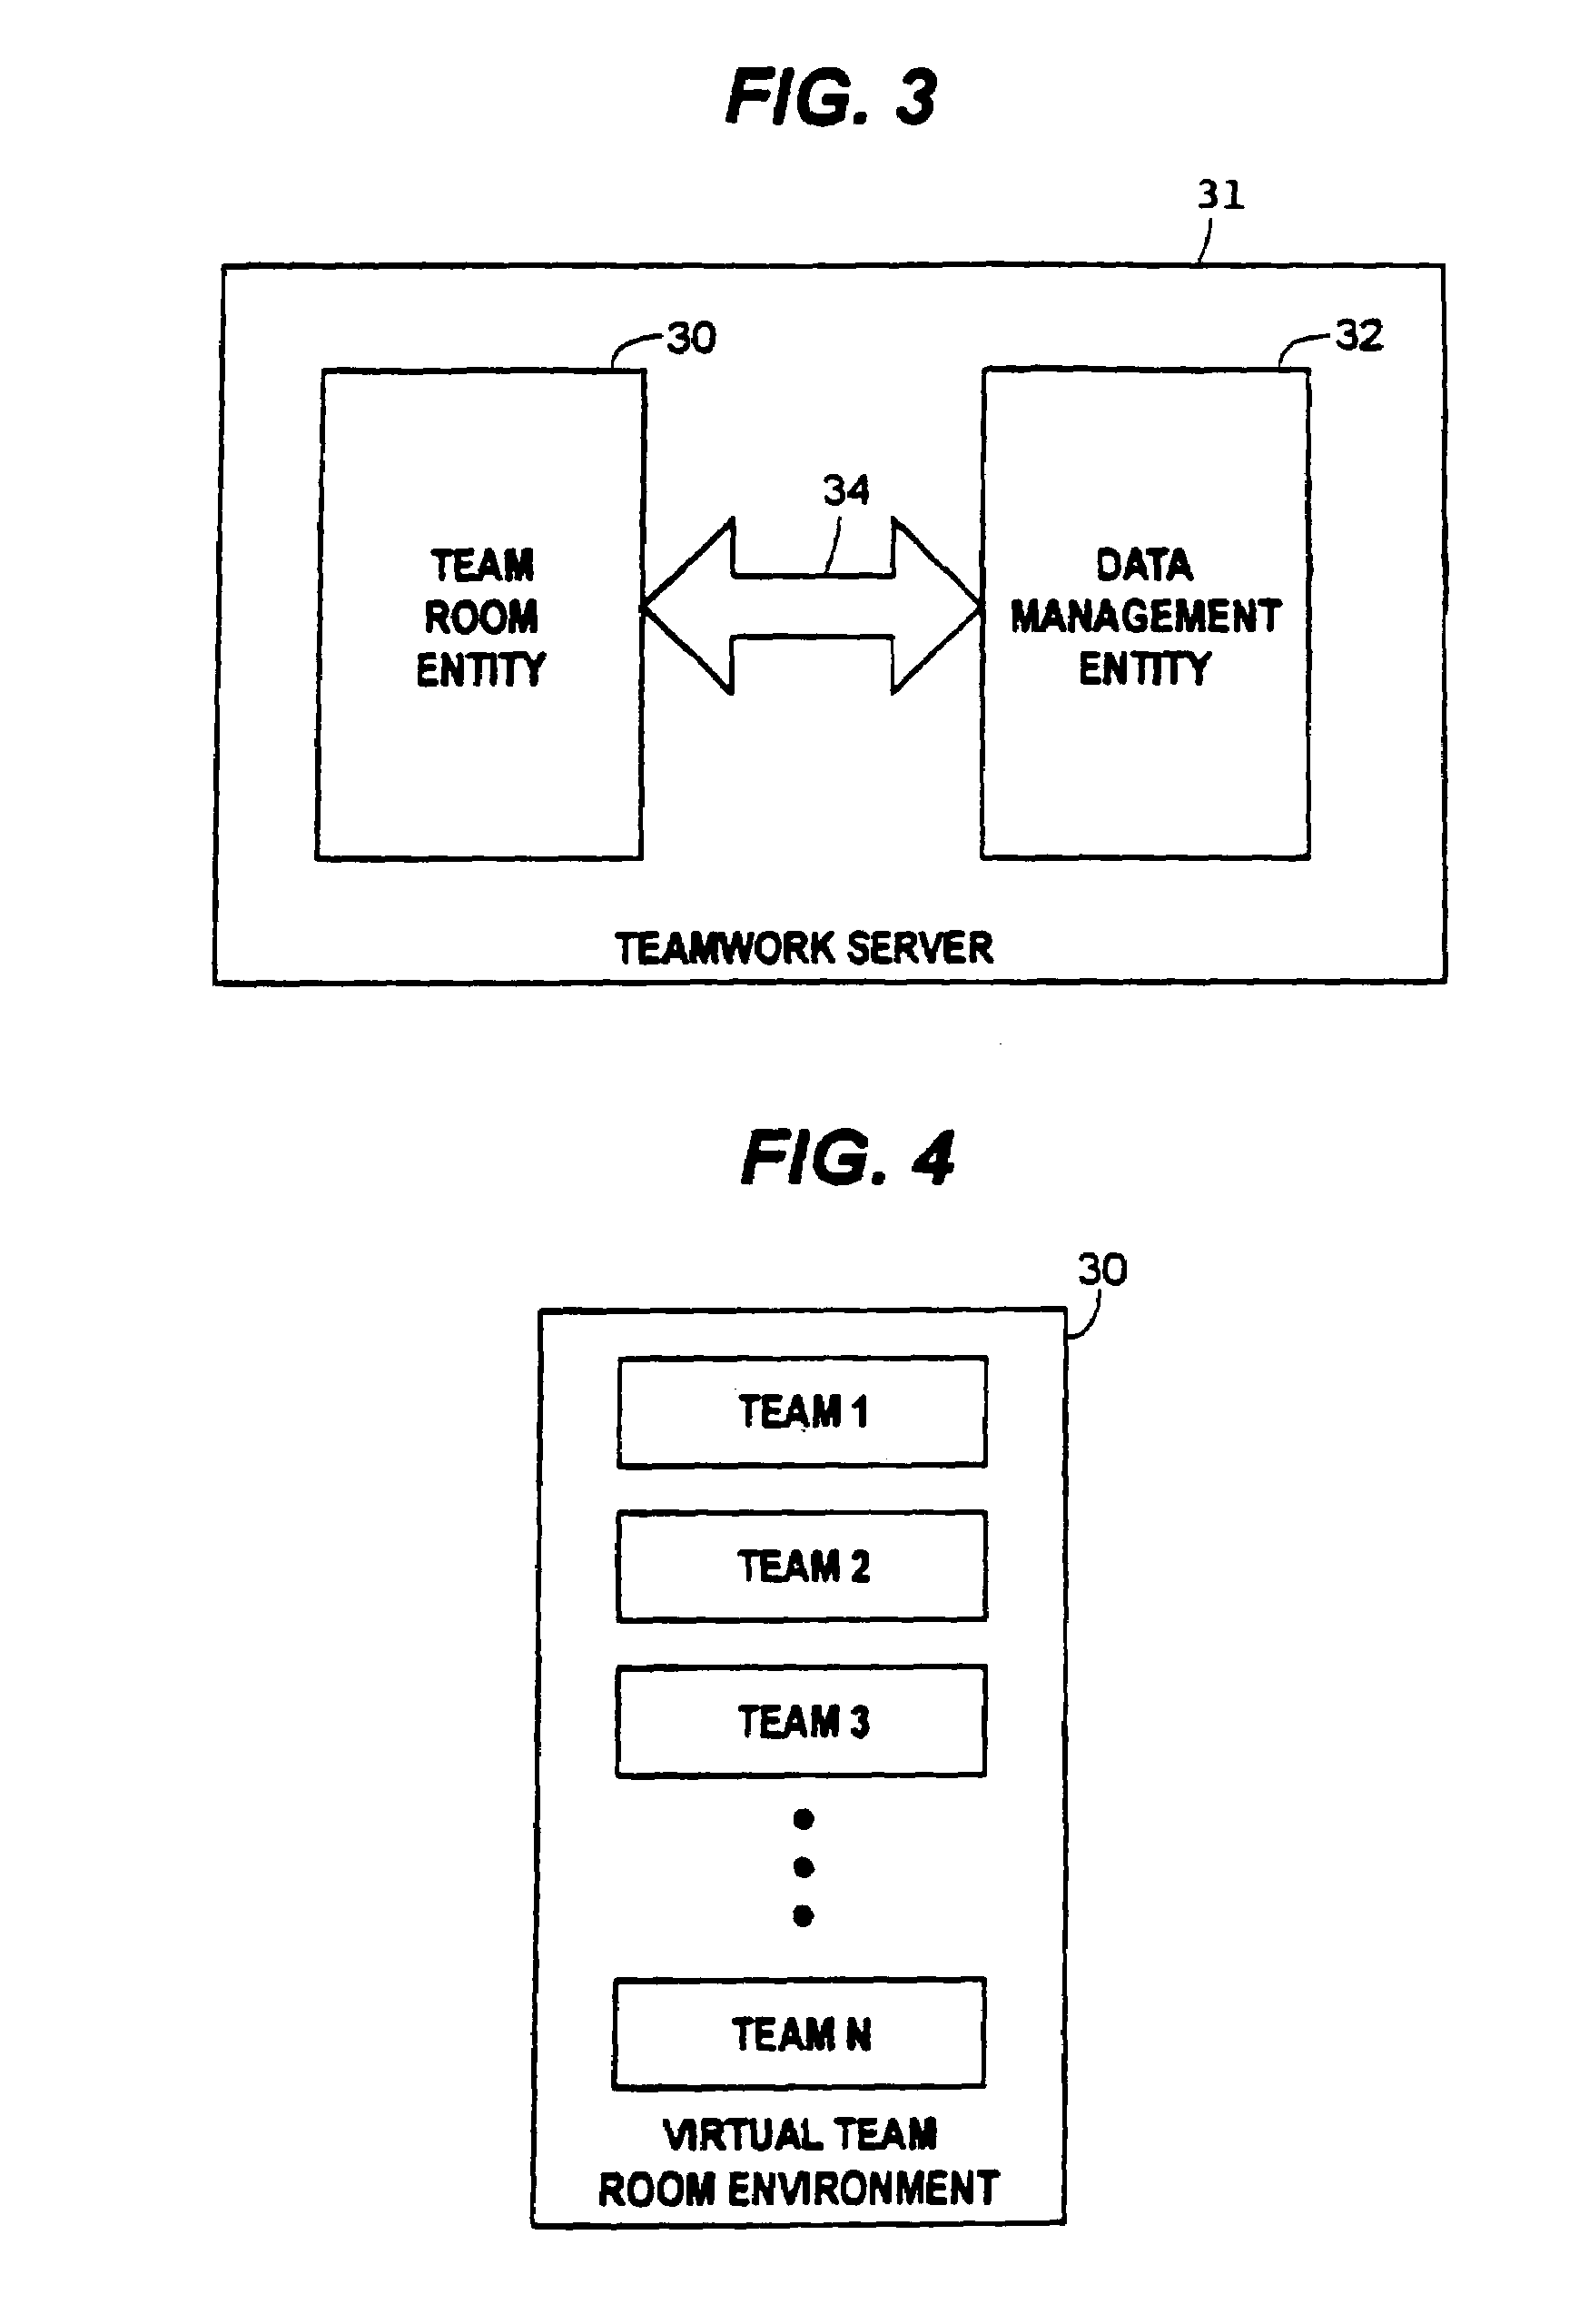 System and method for managing communications and collaboration among team members